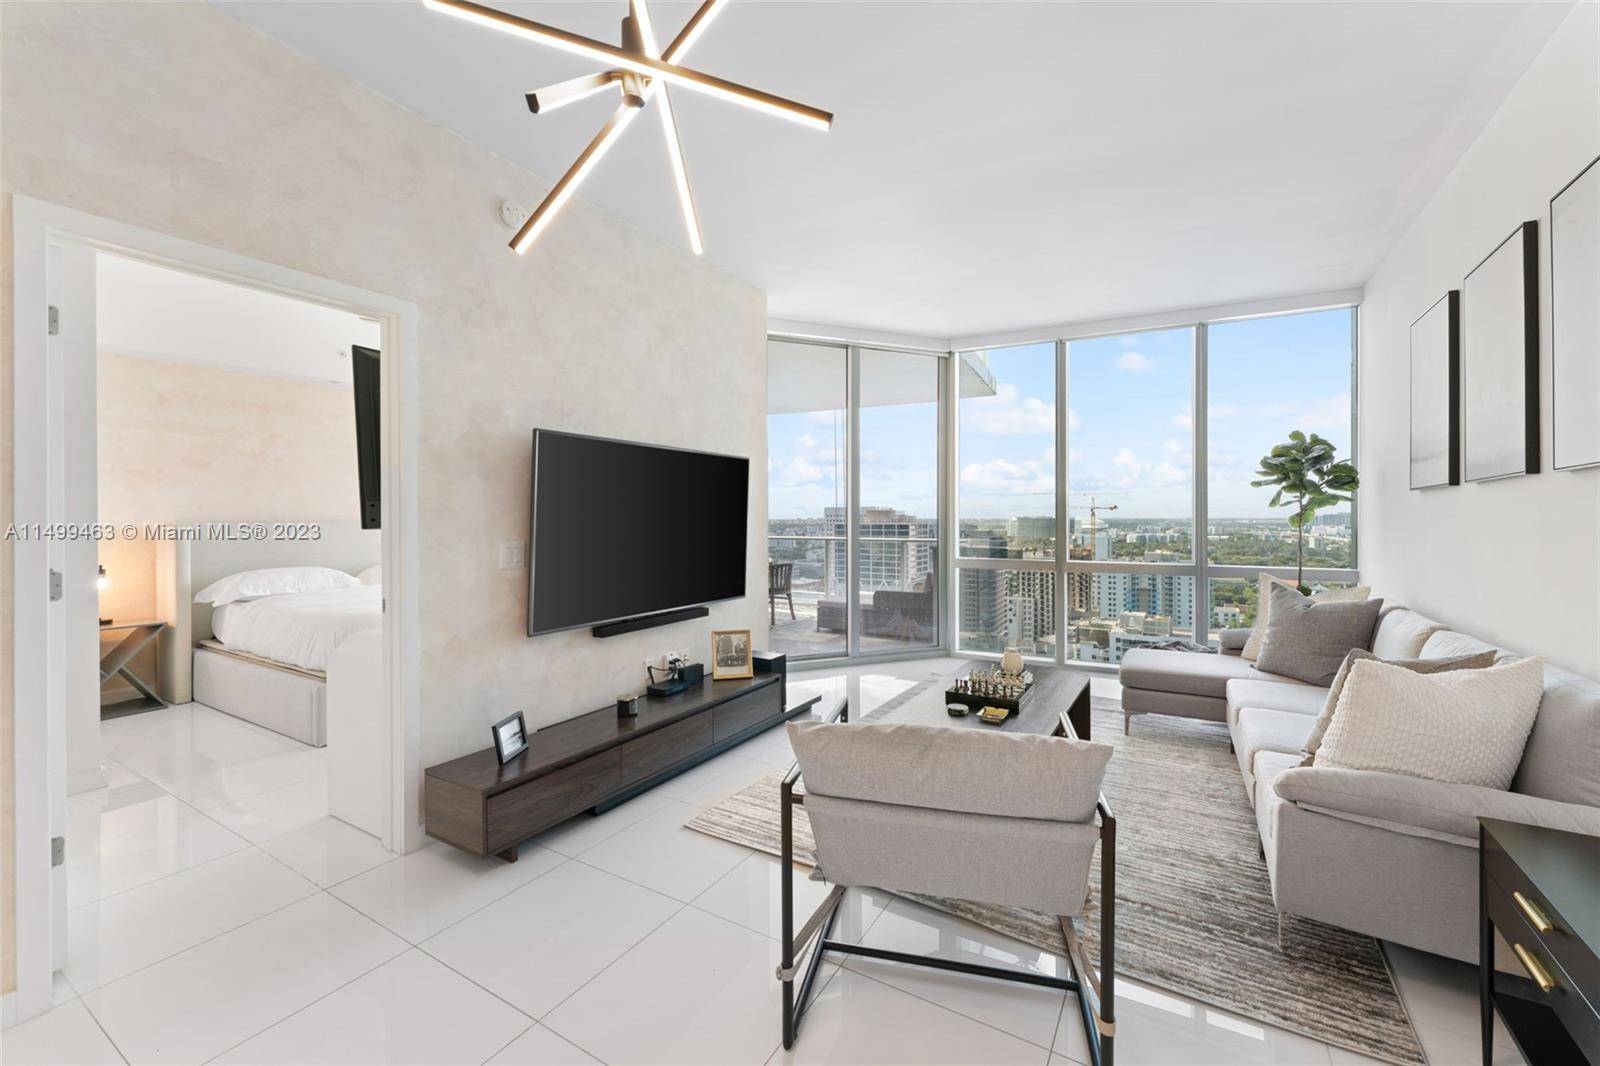 Experience elevated living at its finest in the highest 08 line available at Paramount Miami World Center !